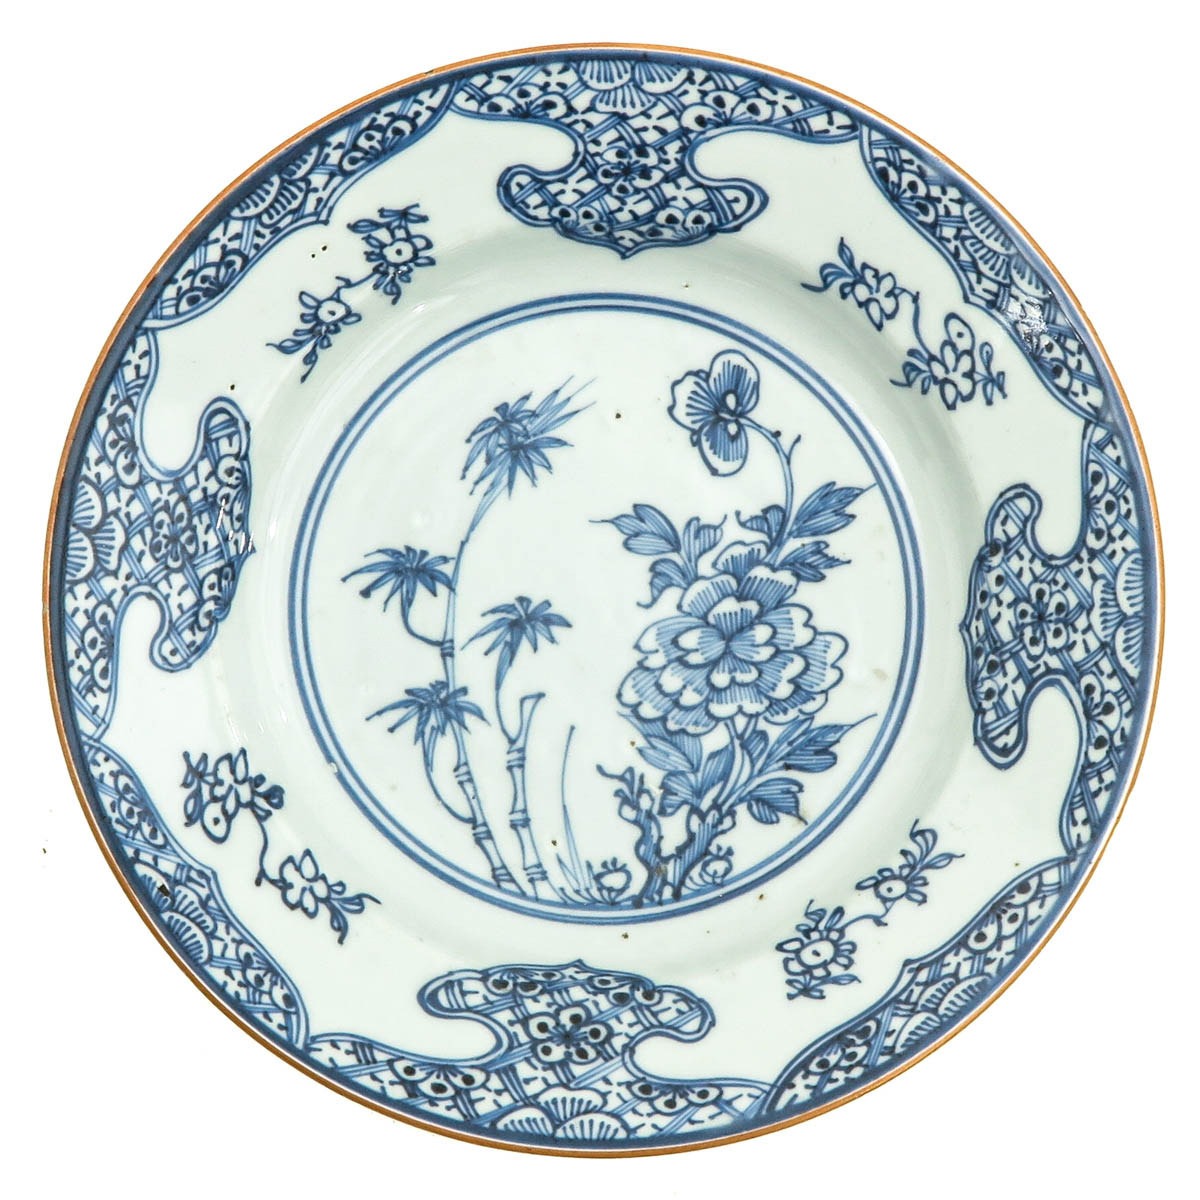 A Collection of 3 Blue and White Plates - Image 5 of 10